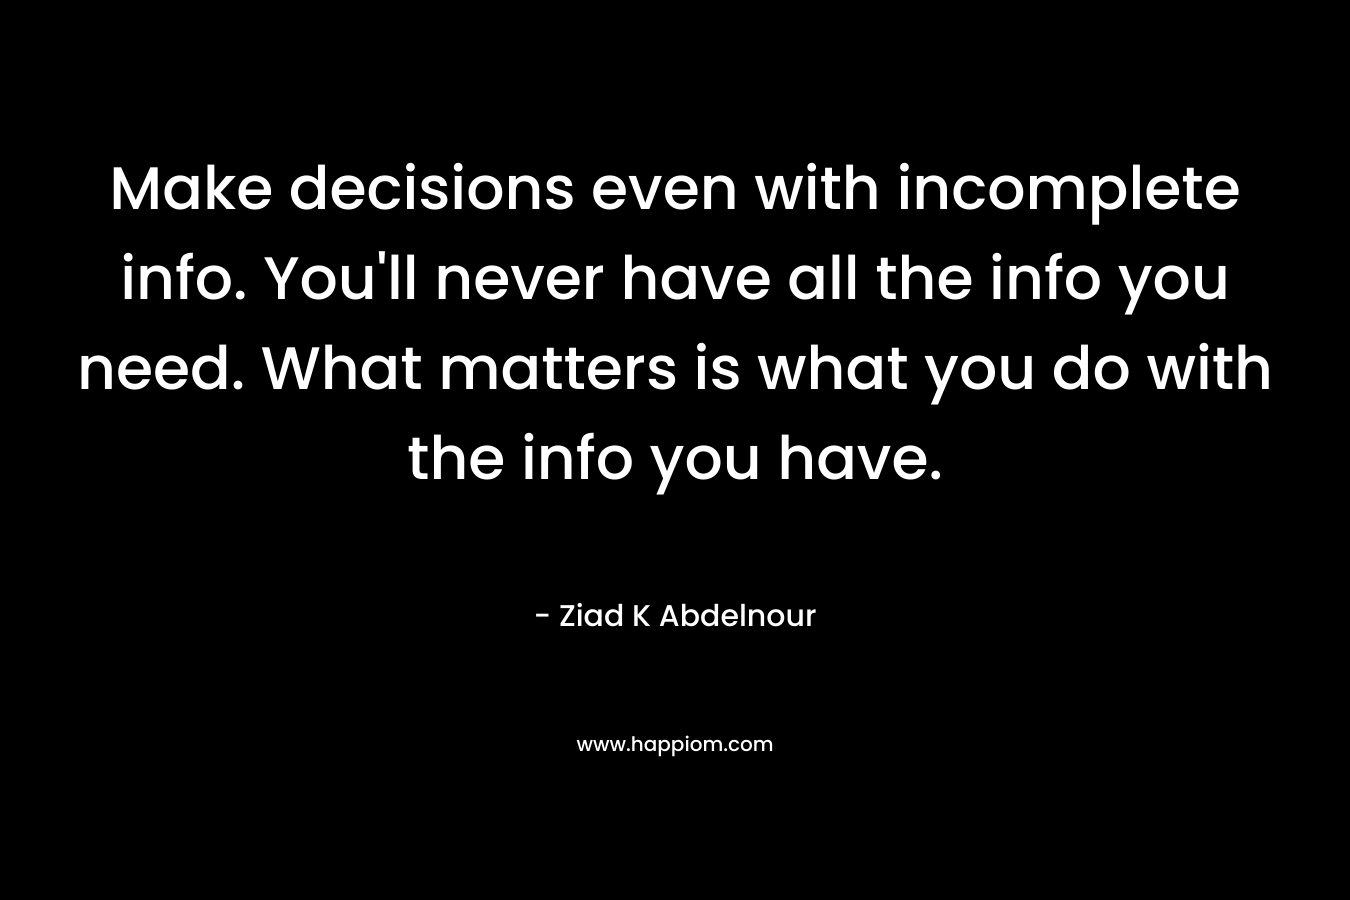 Make decisions even with incomplete info. You’ll never have all the info you need. What matters is what you do with the info you have. – Ziad K Abdelnour